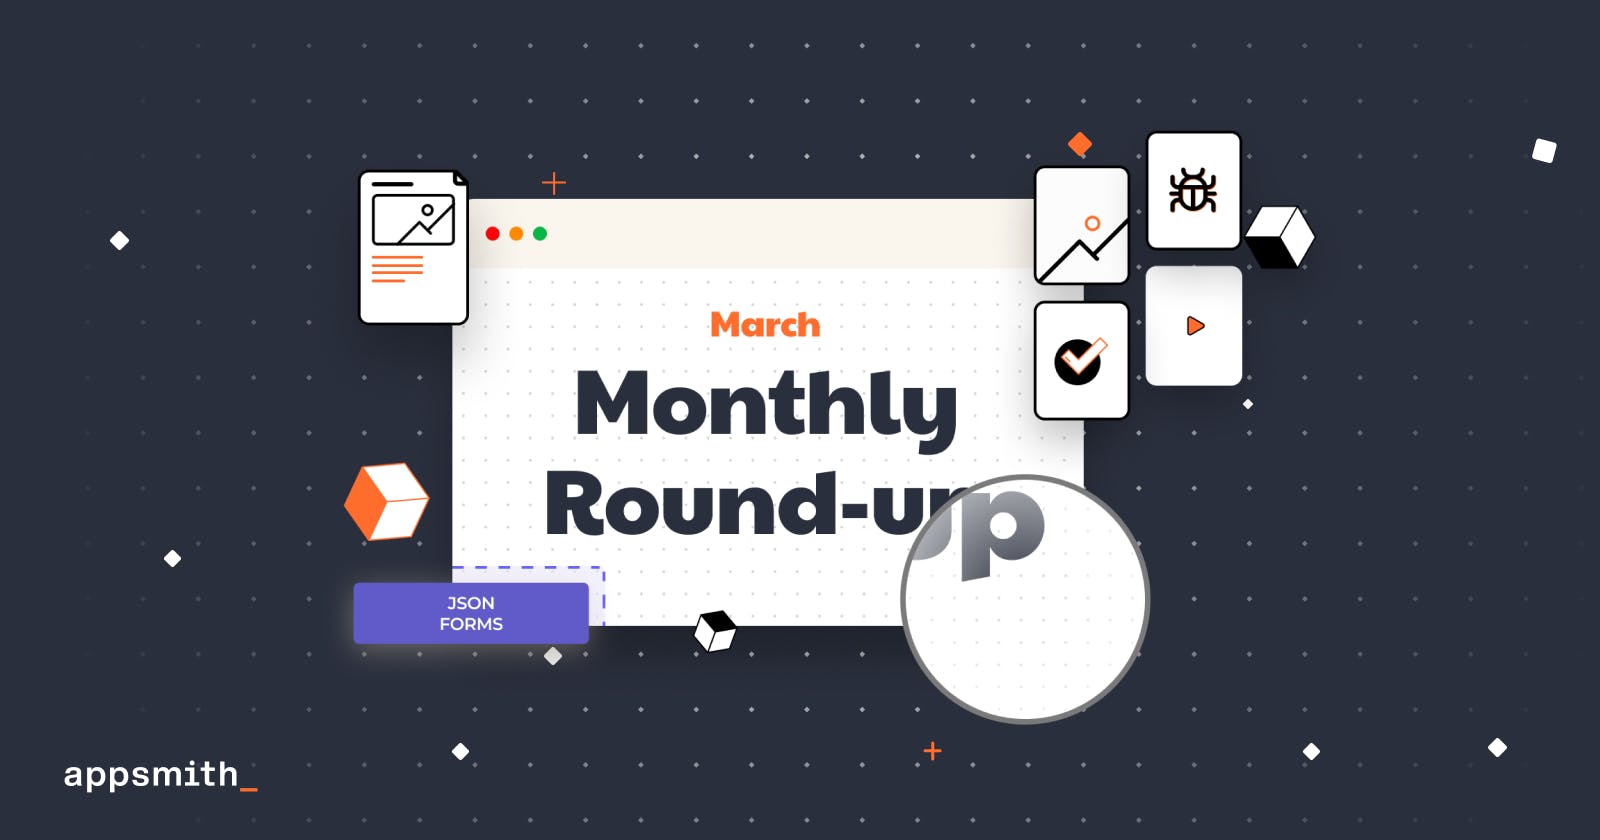 March Round-up: Templates, JSON Form, and More Product Updates